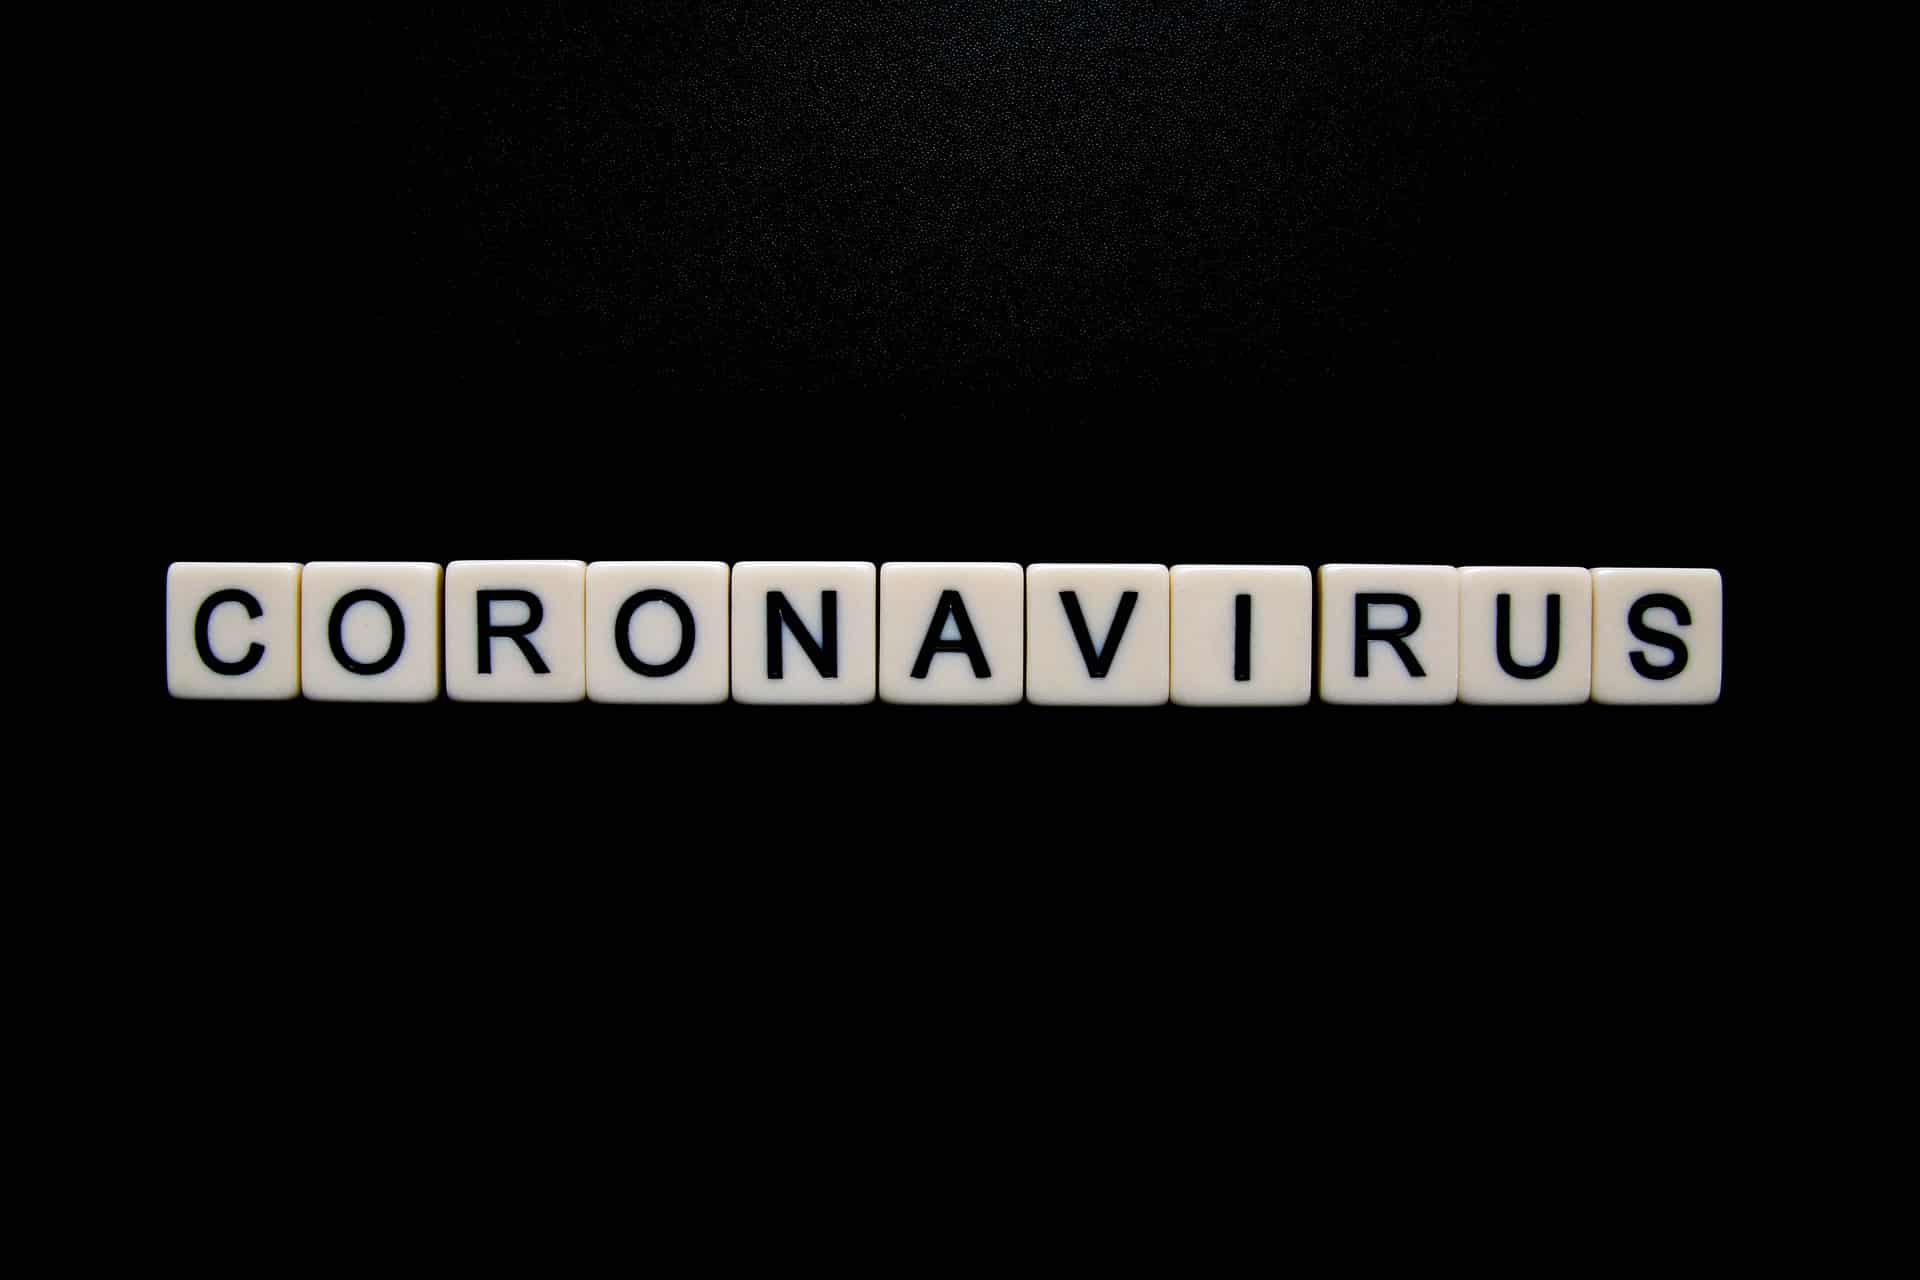 Coronavirus spelled out in white block letters against a black background